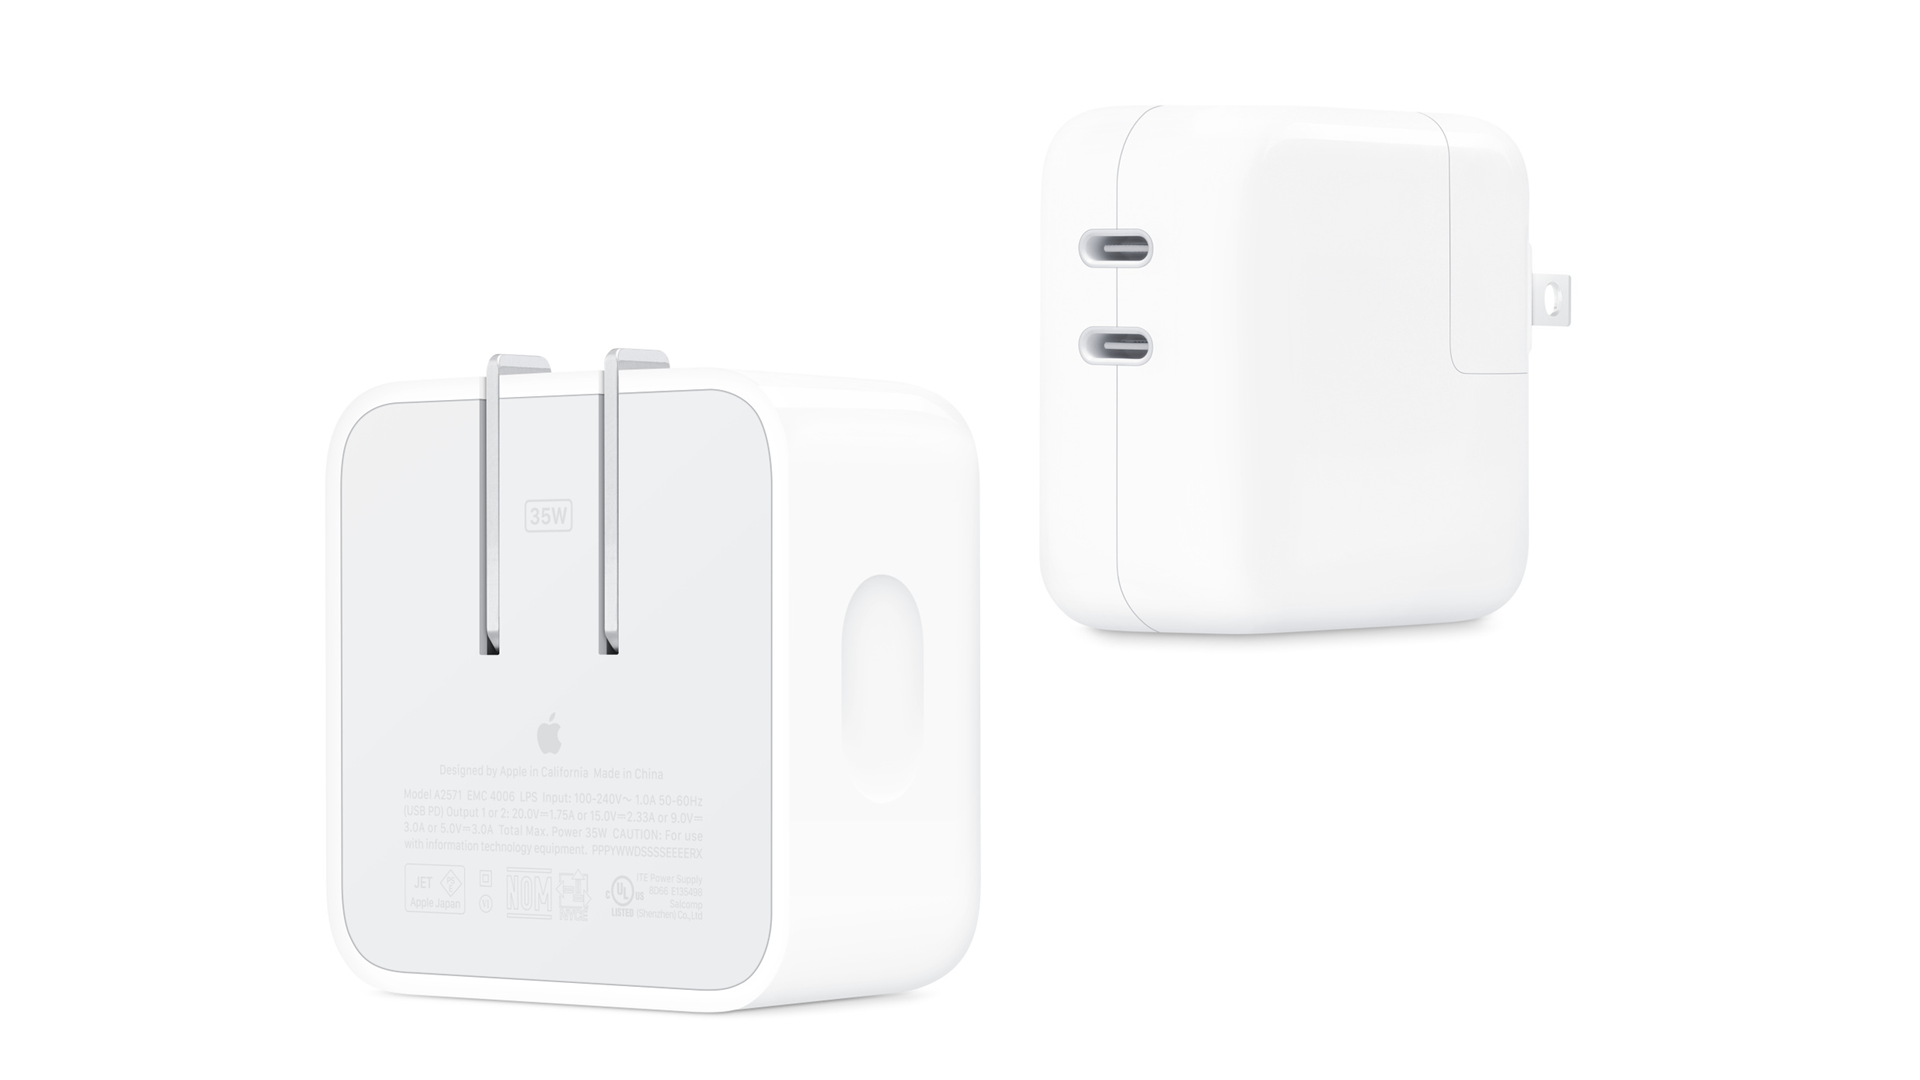 Apple’s Insanely Priced Dual USB-C Chargers Arrive: Buy These Instead